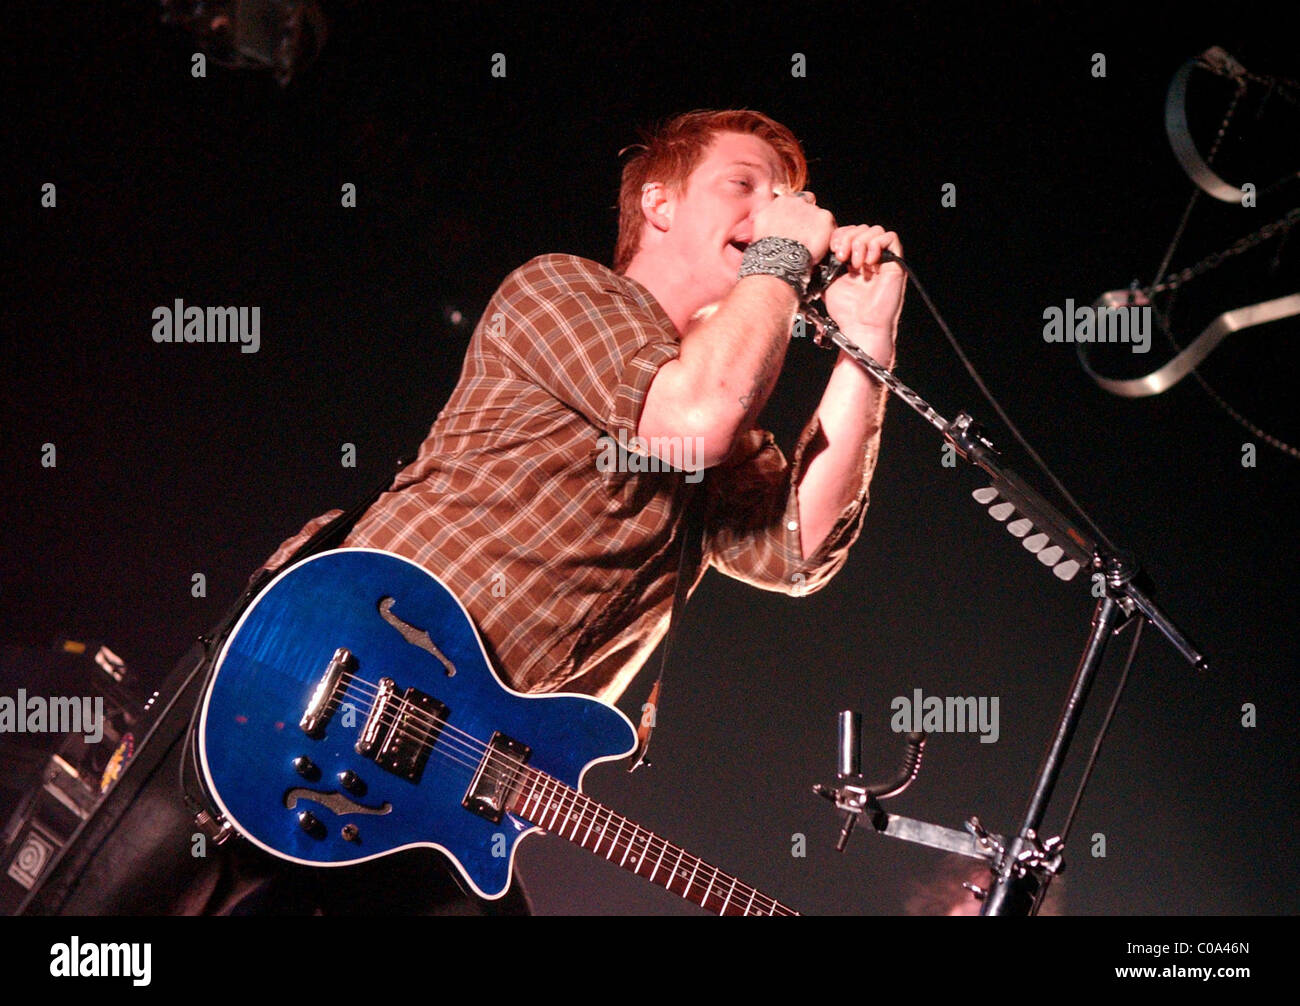 Josh Homme lead singer of Queens Of The Stone Age Play a sold out concert  held at the Heineken Music Hall. Amsterdam, Holland Stock Photo - Alamy